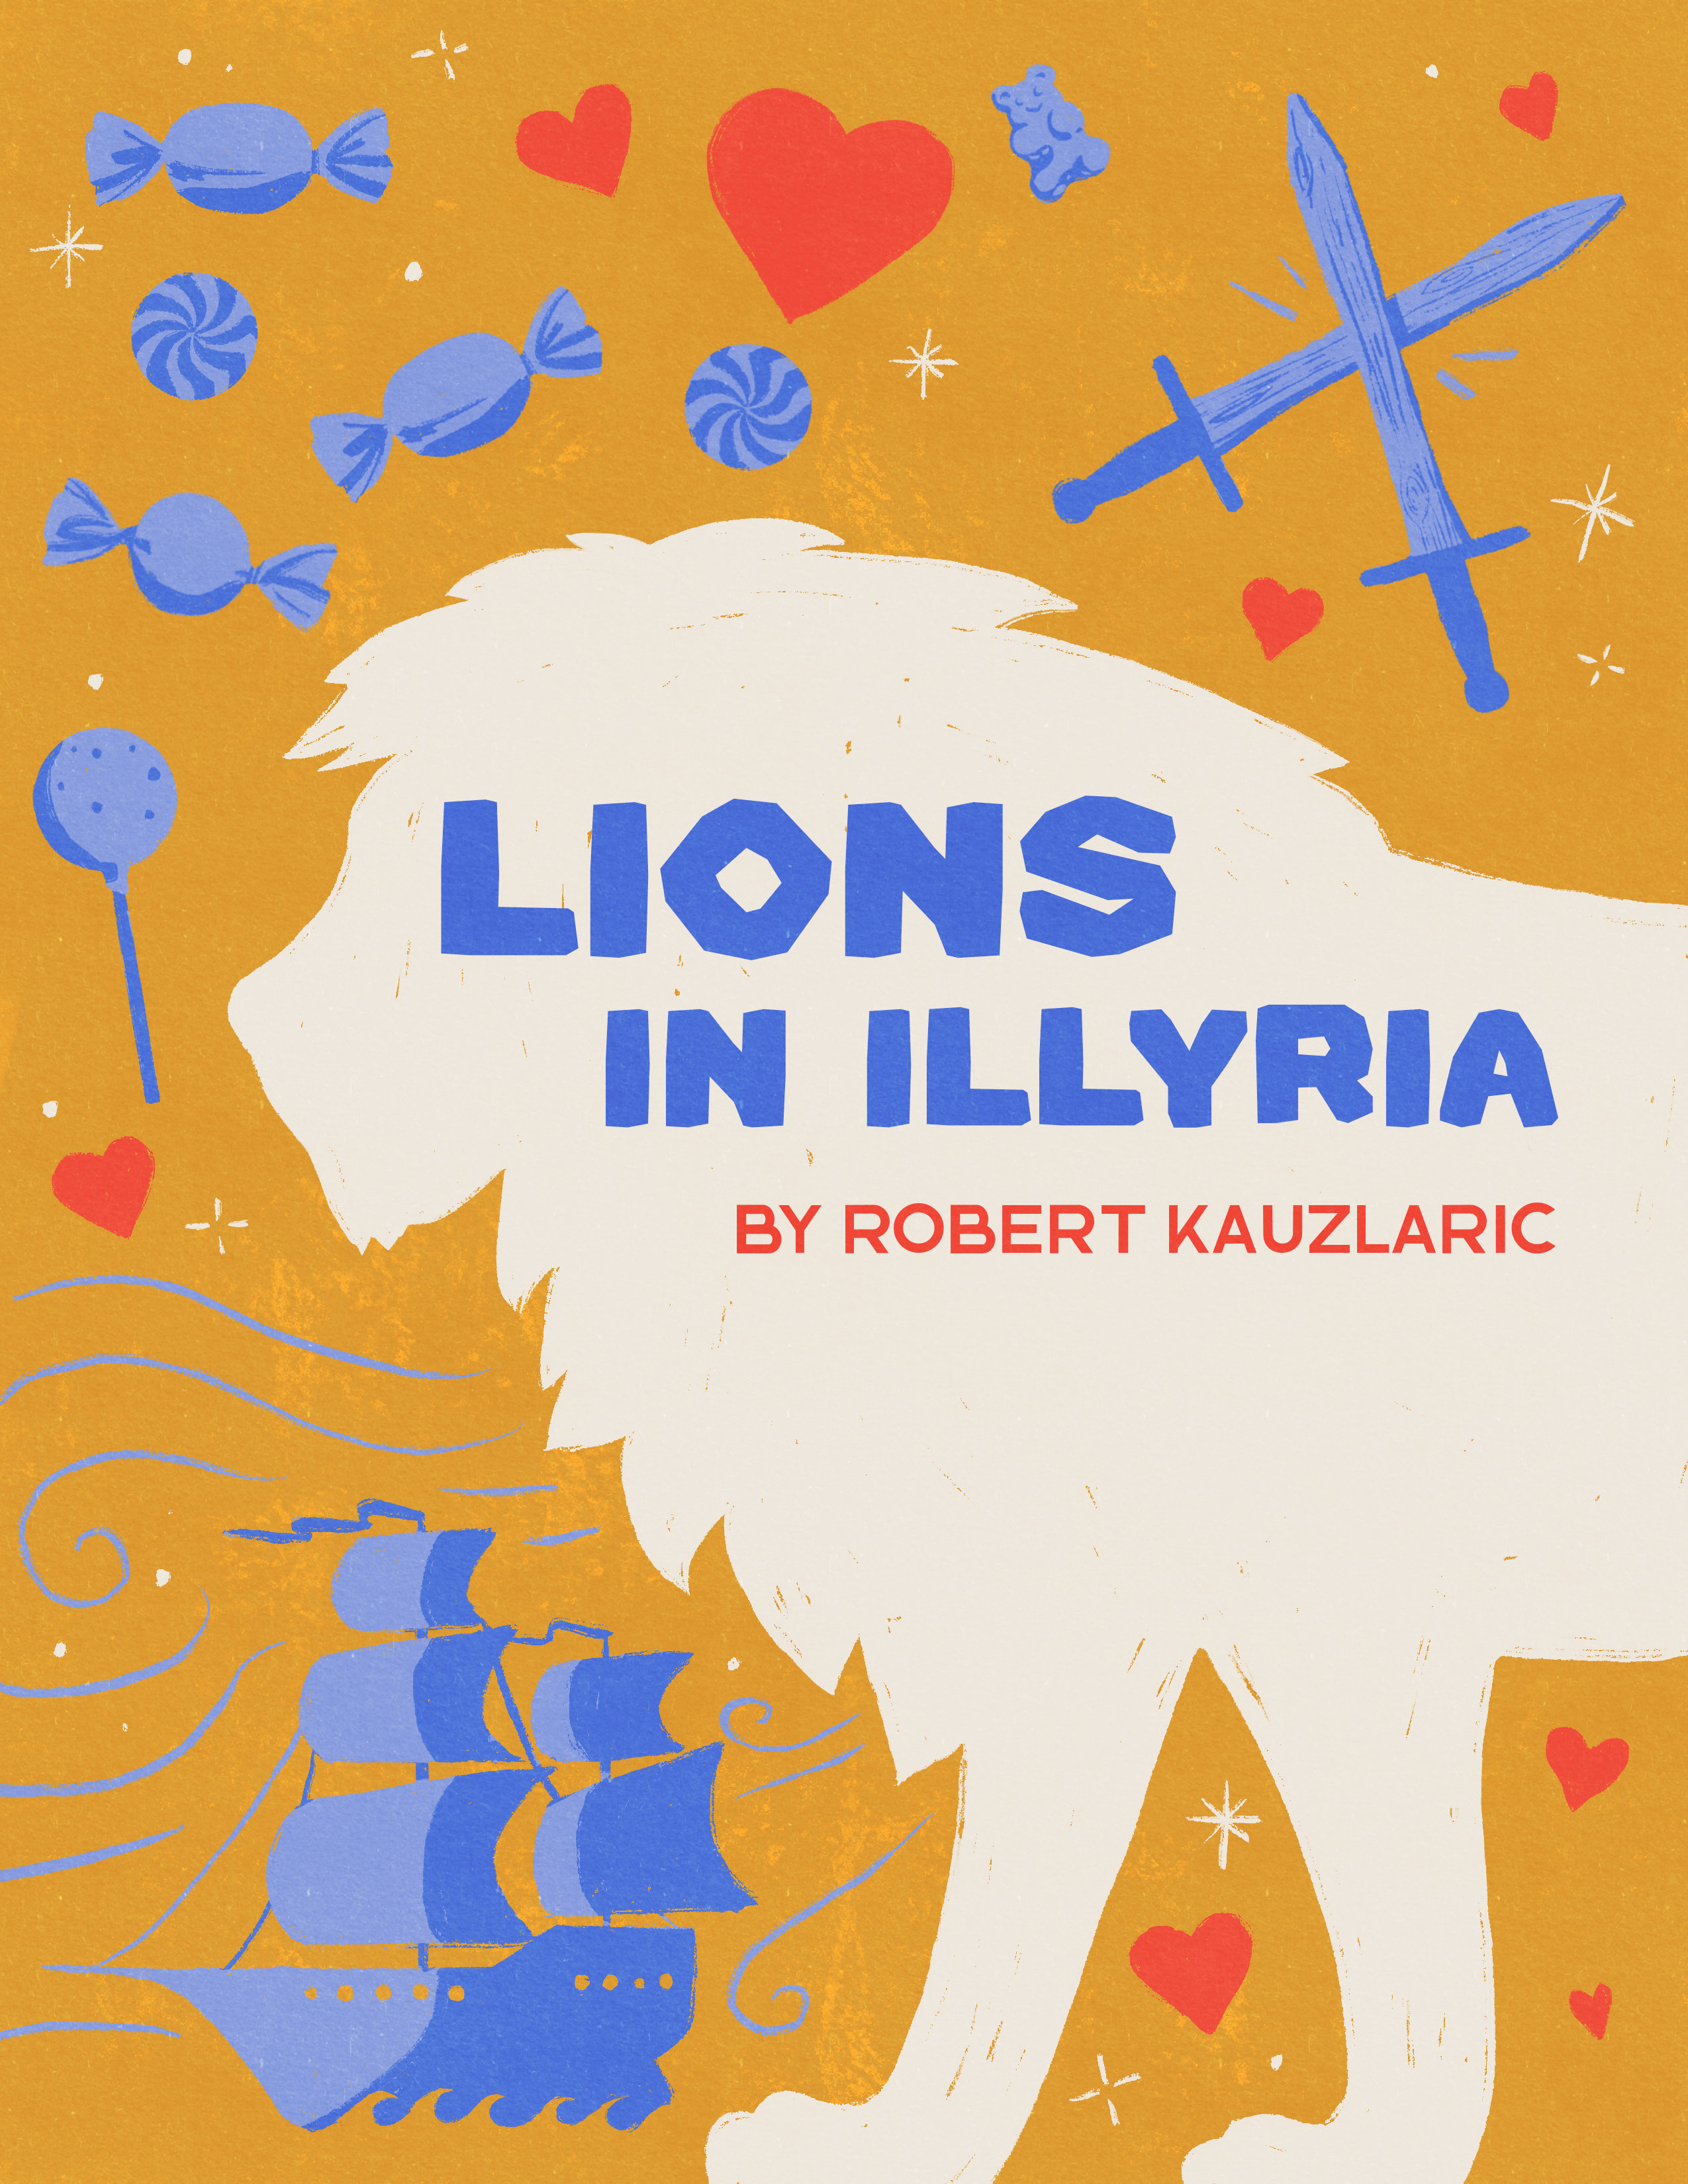 Poster for Lions of Illyria by Robert Kauzlaric